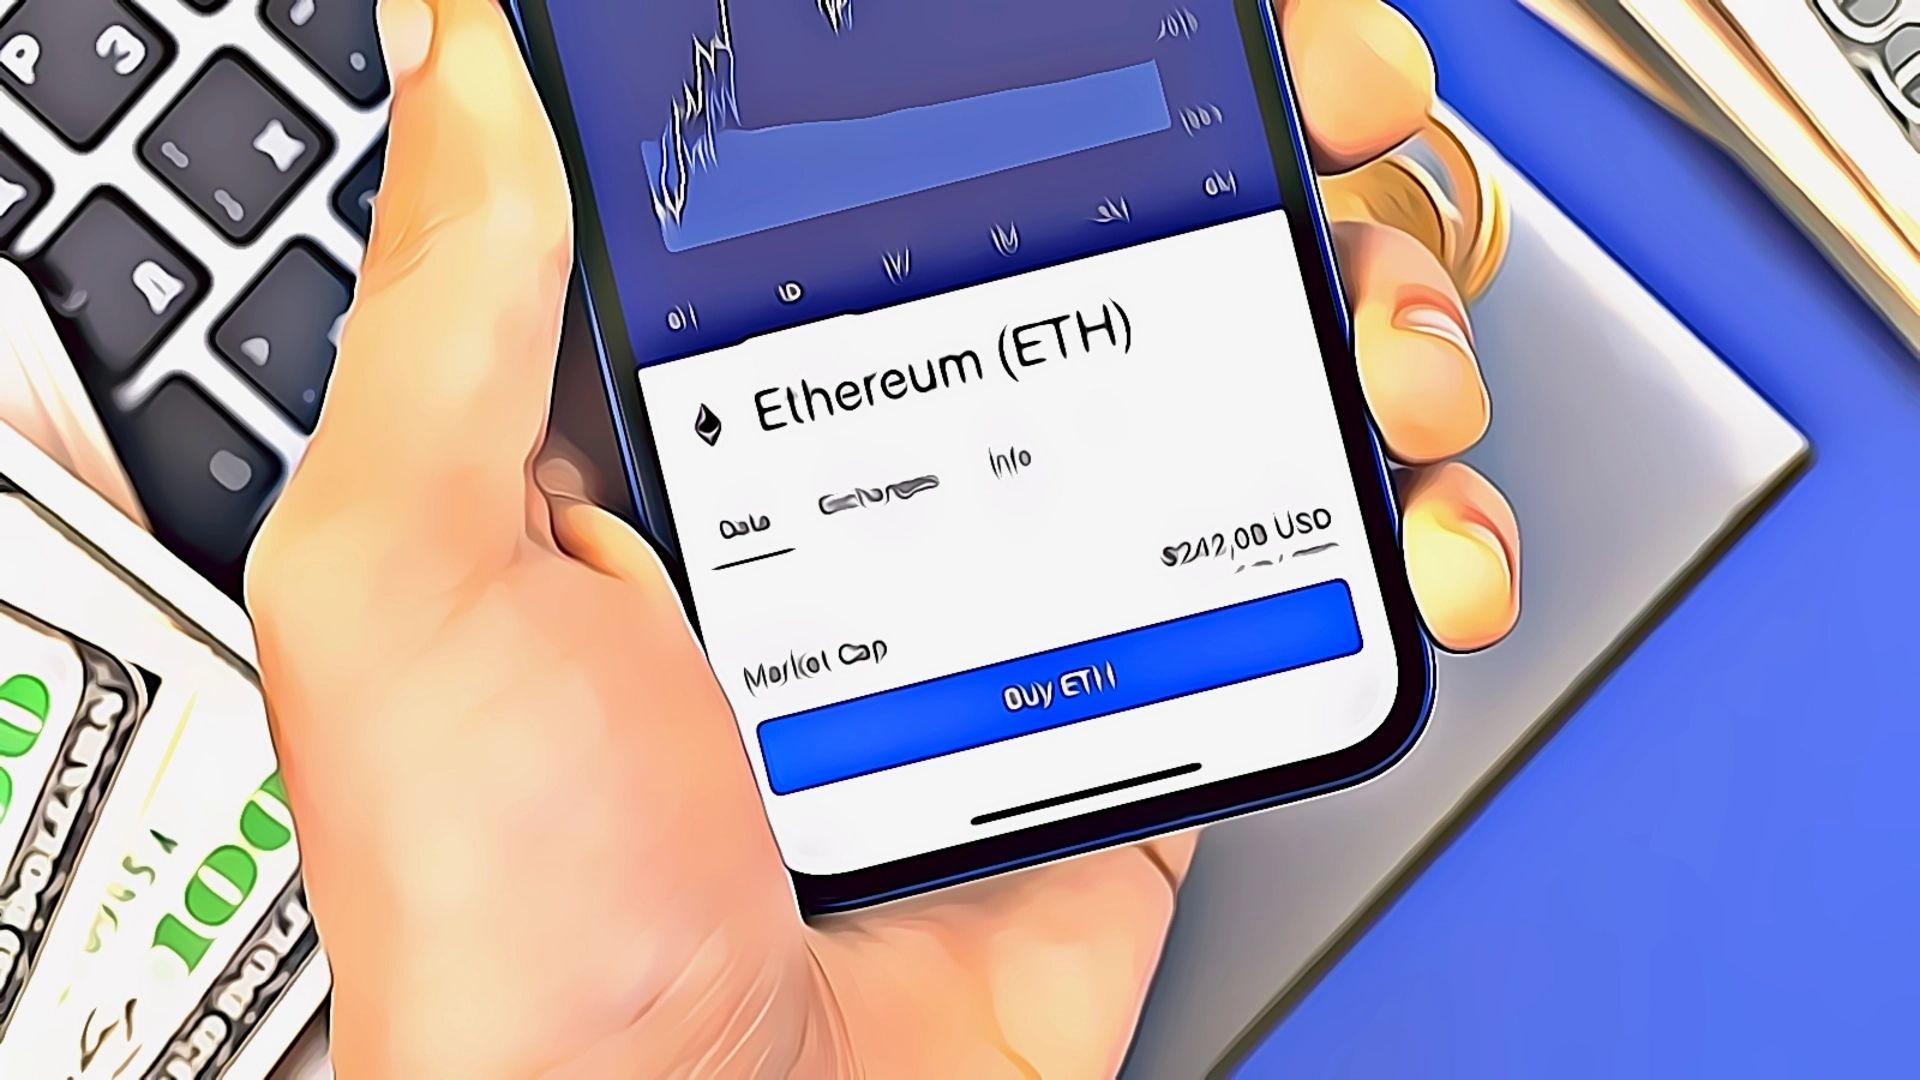 Ethereum Witnesses Massive Withdrawals From Exchanges Amid ETF Speculation